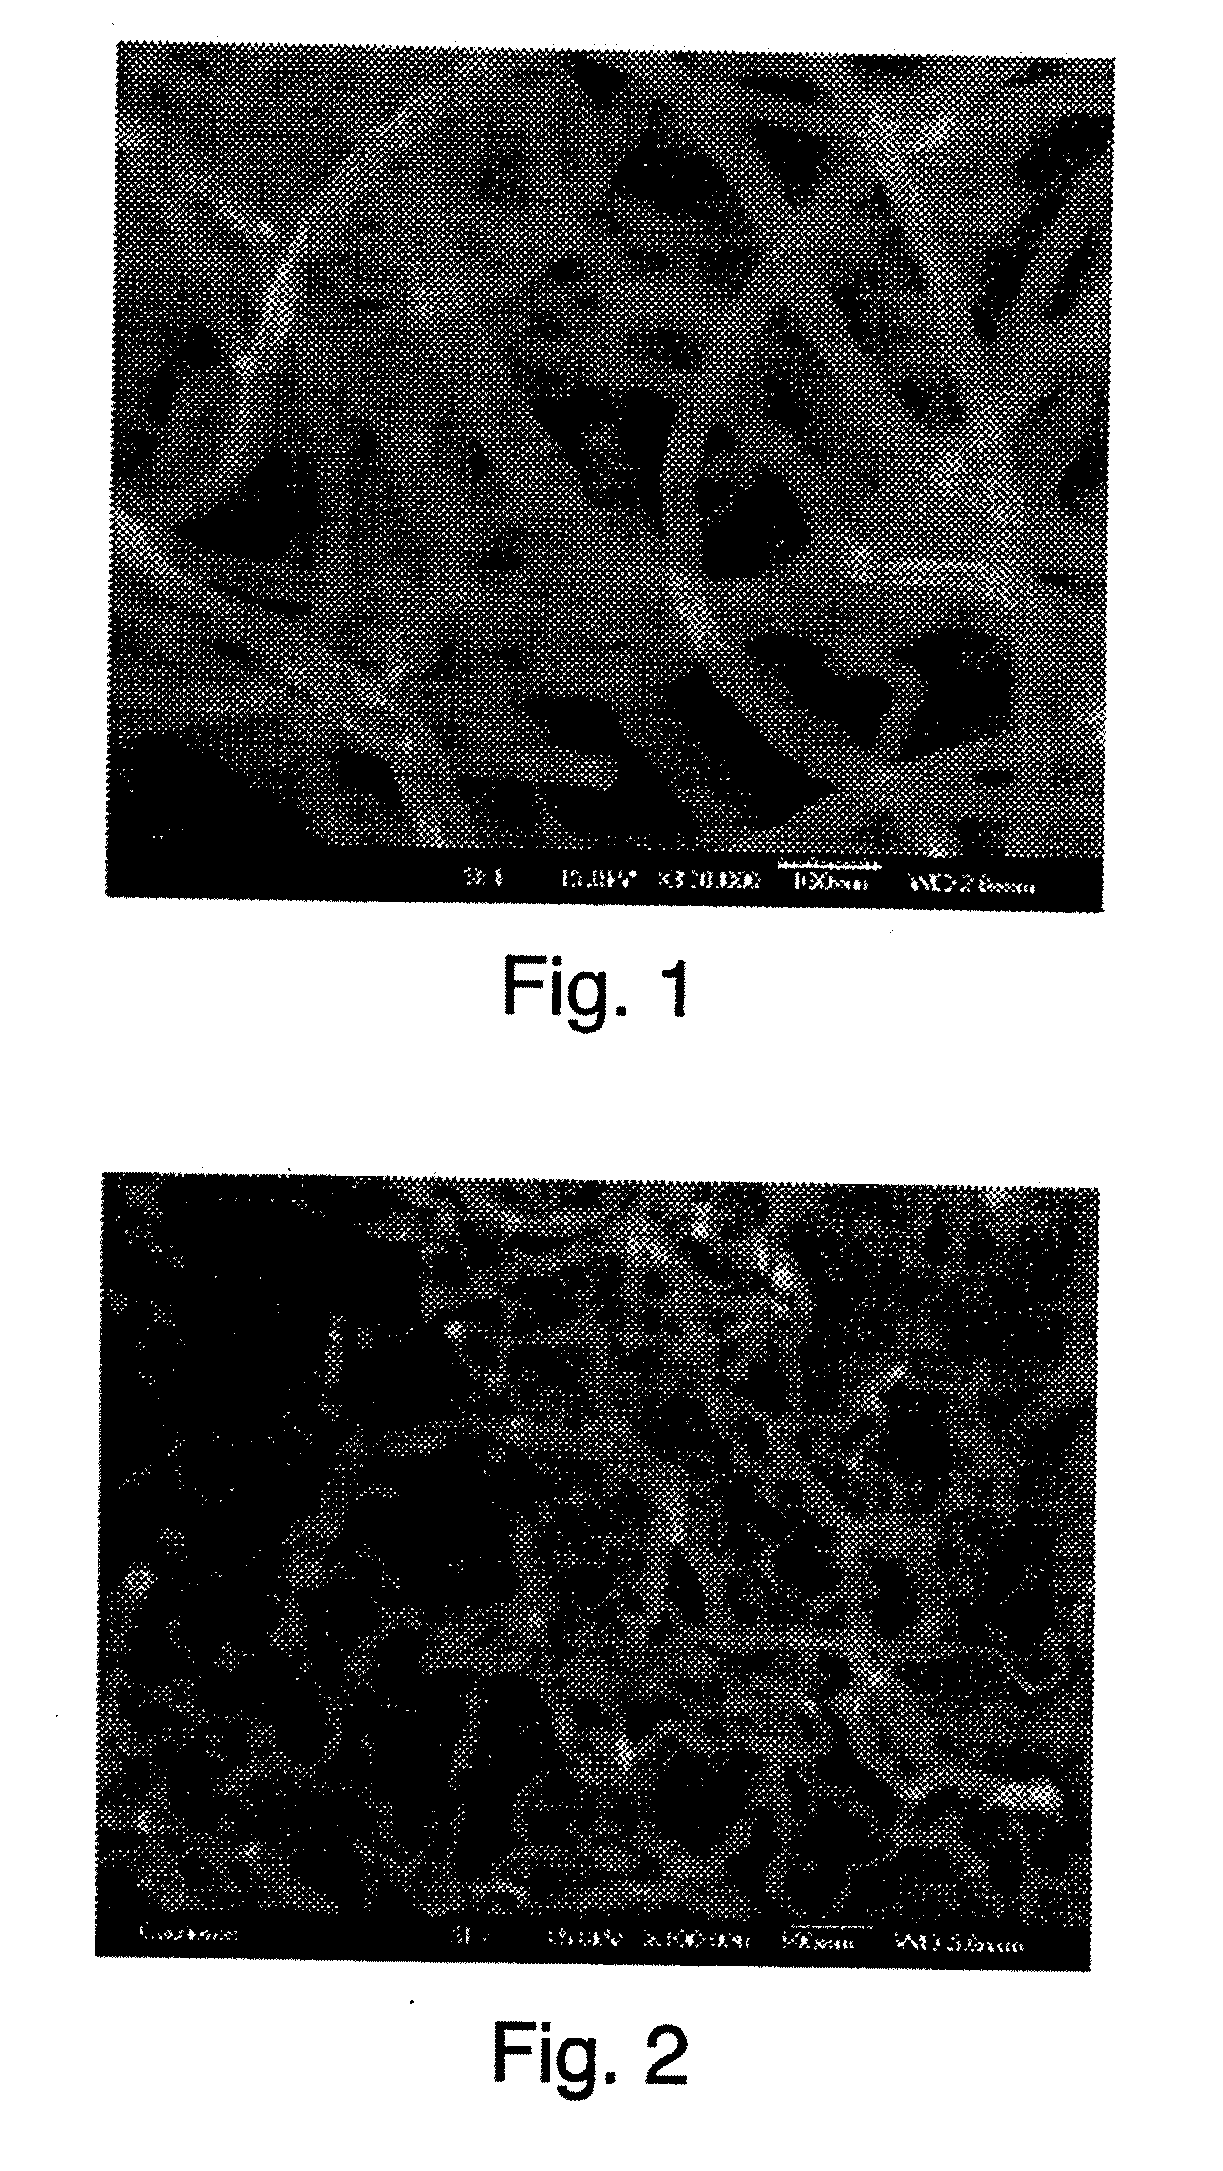 Combustion-Assisted Substrate Deposition Method For Producing Carbon Nanosubstances